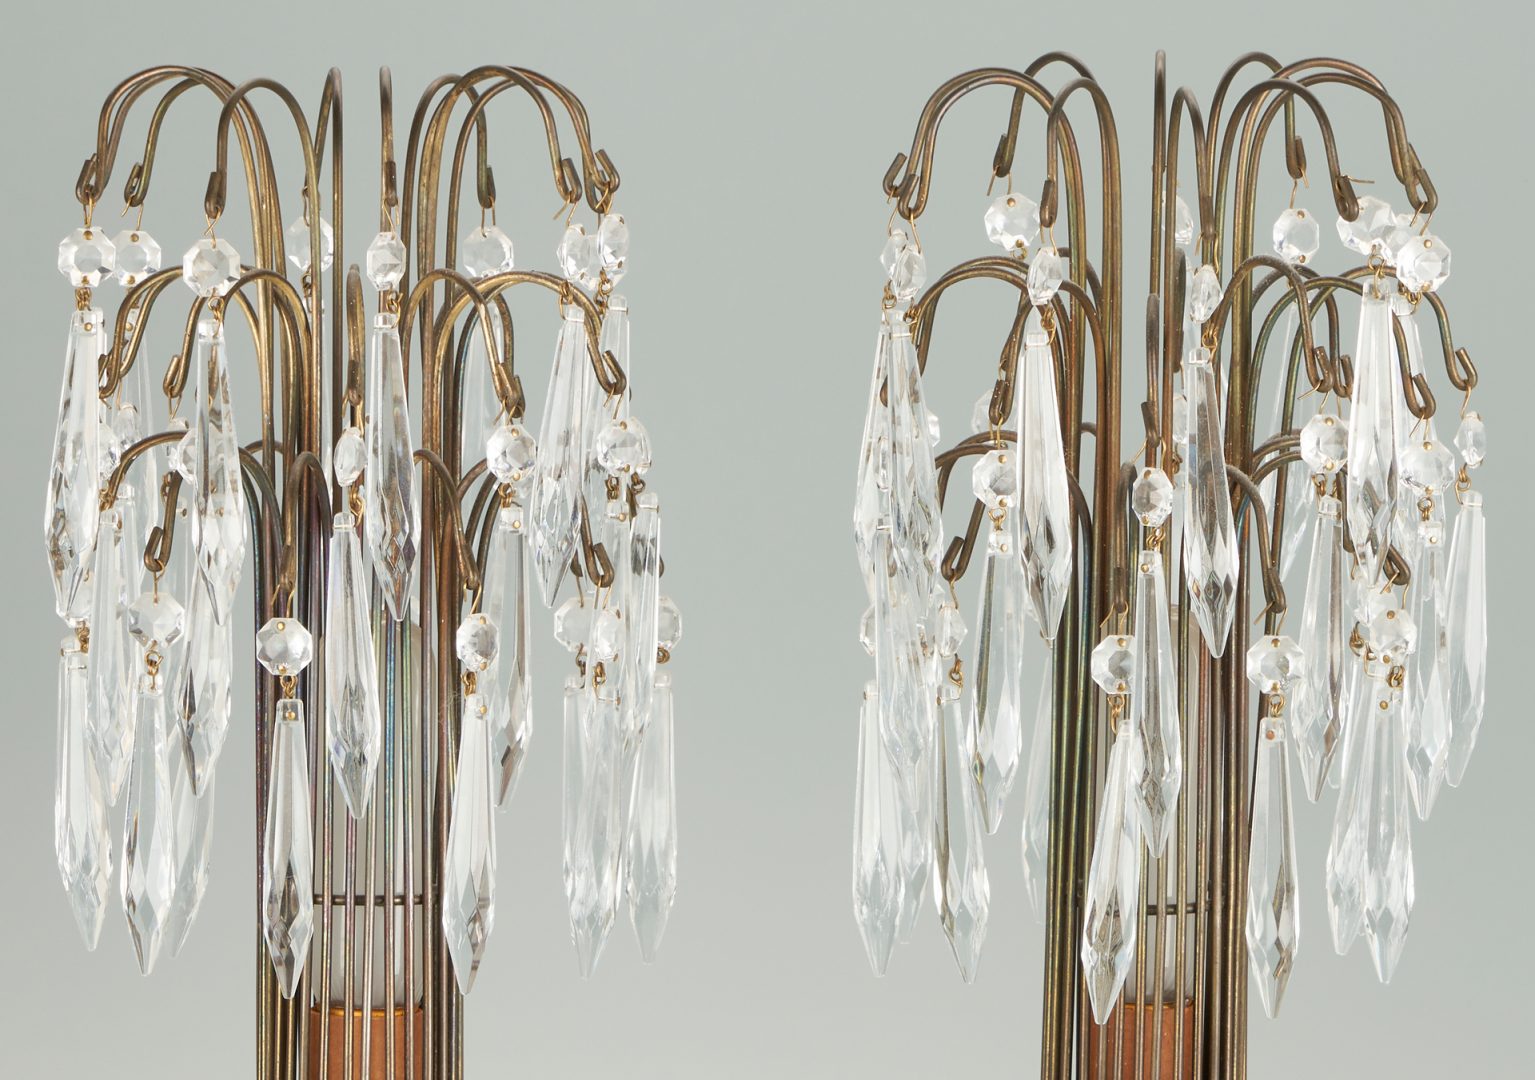 Lot 1015: Hollywood Regency Lamps and Baccarat Style Candelabra, 4 pcs.